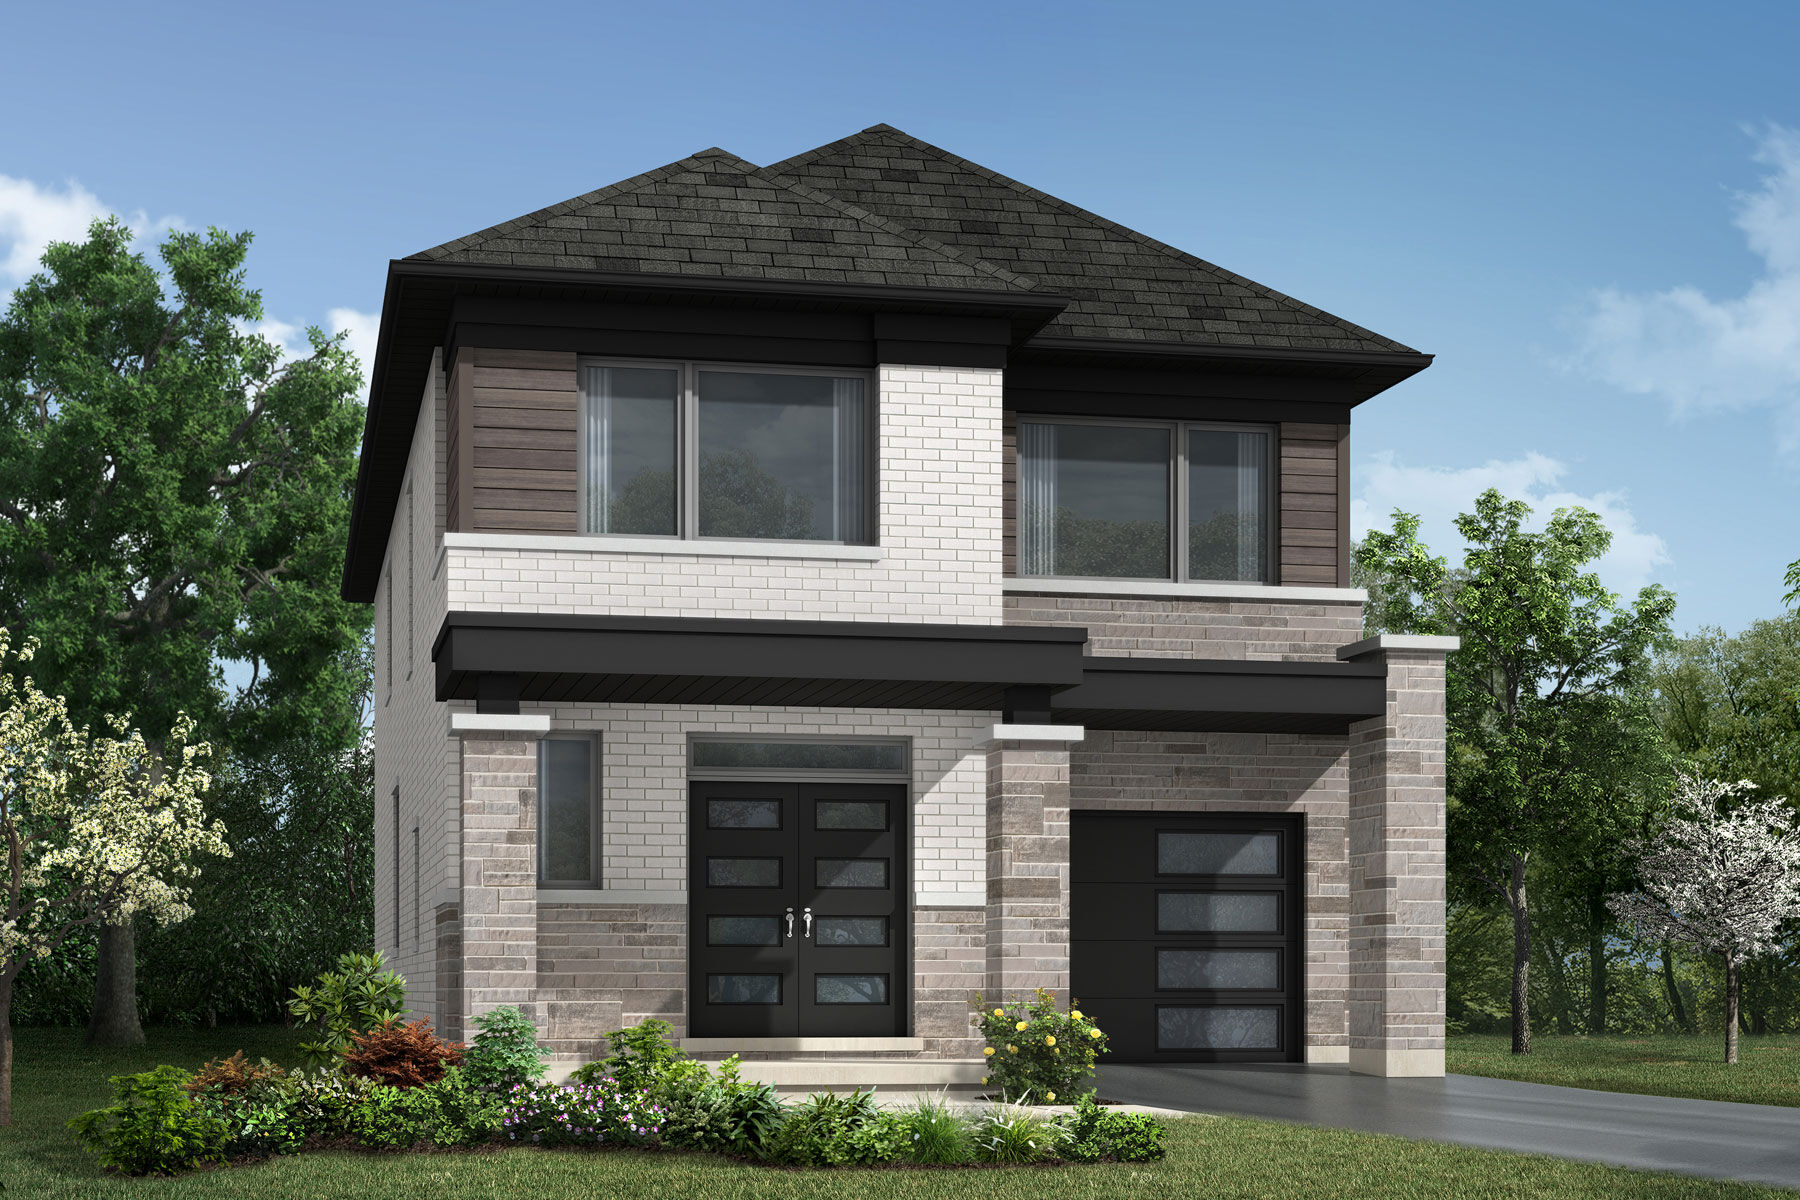  Elevation Front with window and garage